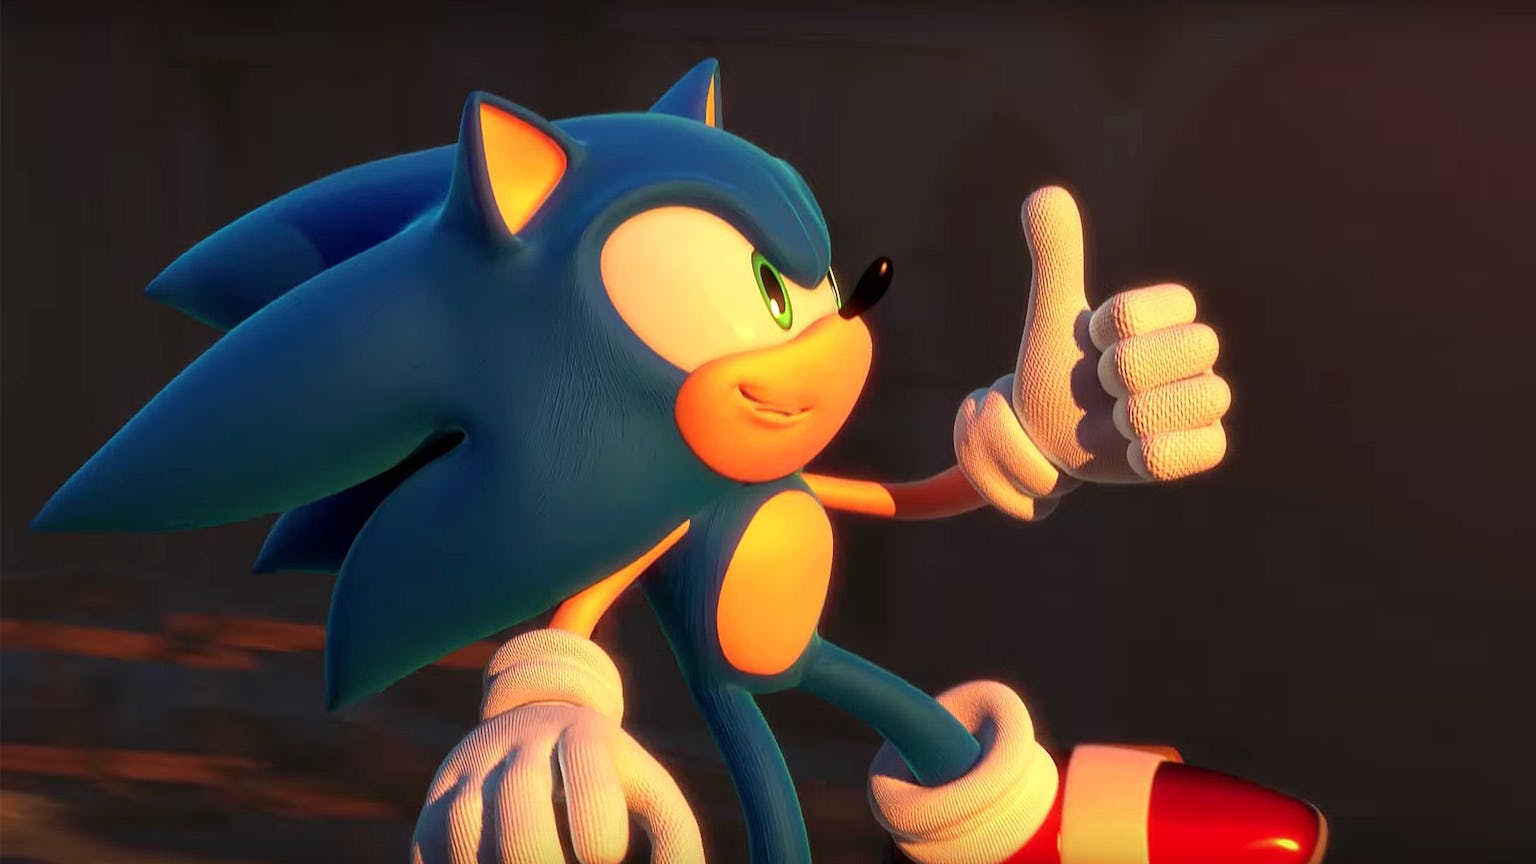 Sonic 2022 release date, trailer, consoles, announcements, and leaks